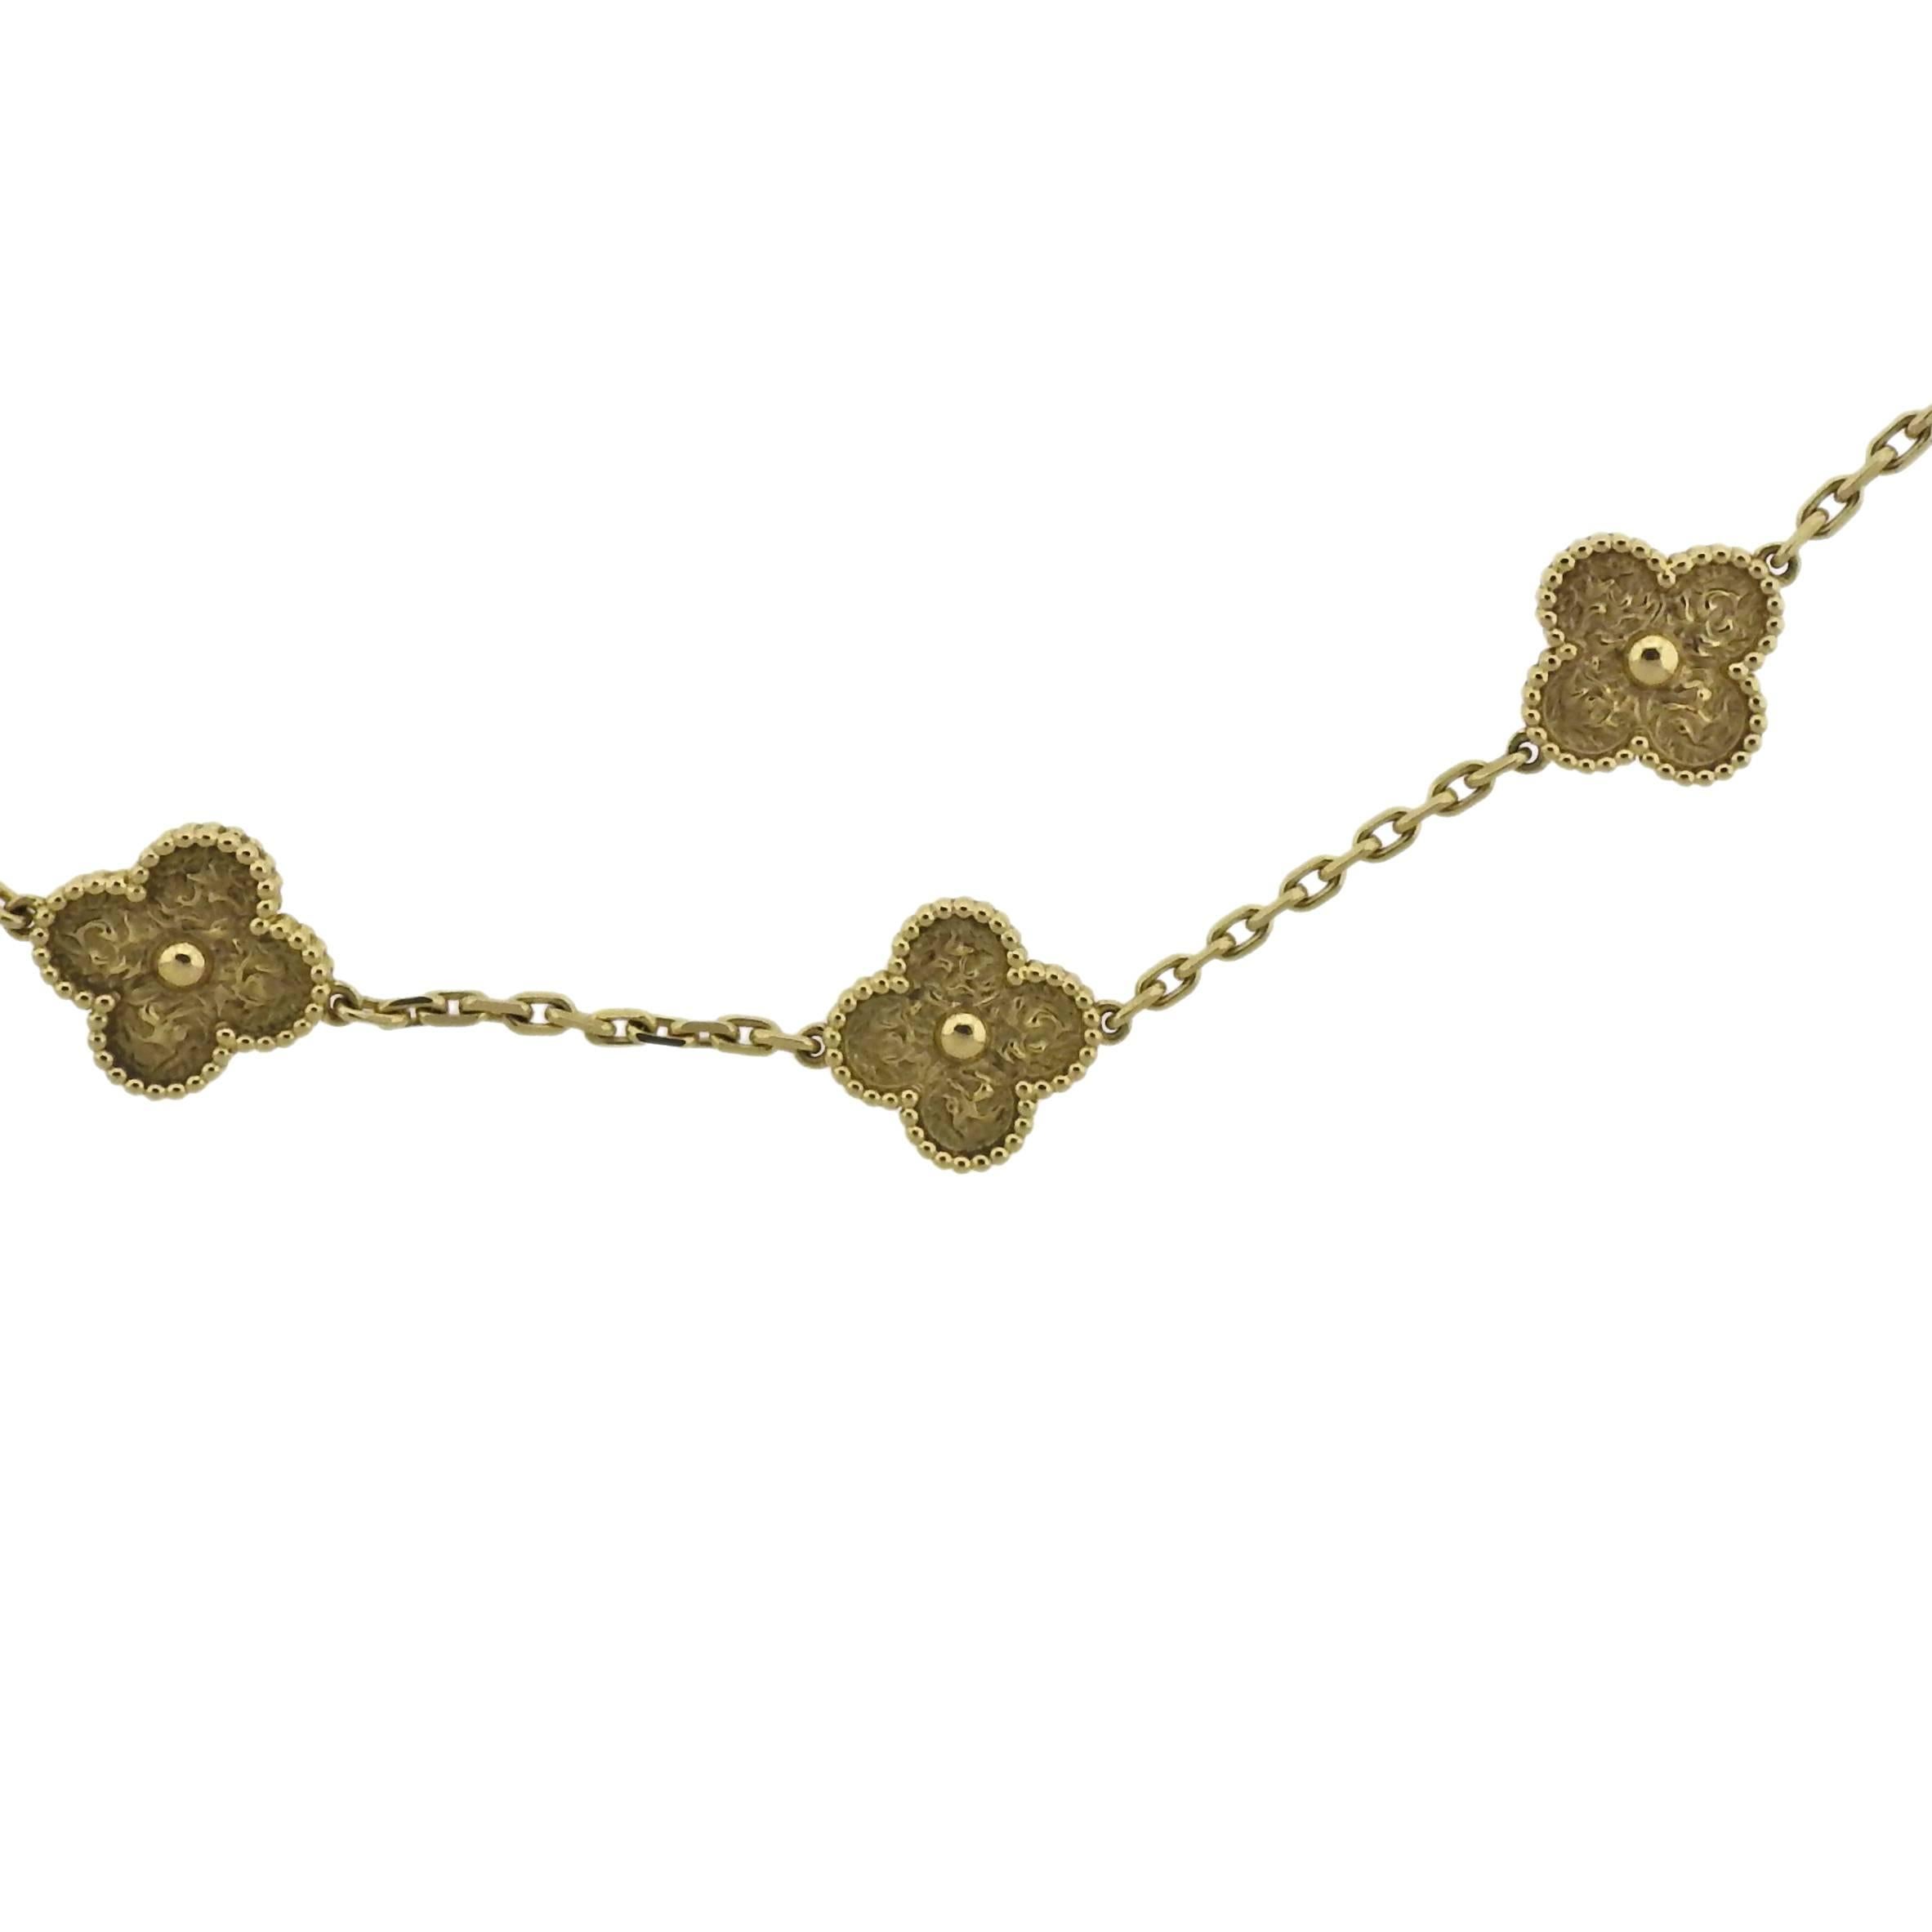 Iconic Vintage Alhambra necklace, crafted by Van Cleef & Arpels, featuring 20 clover motifs. Retail $16500. Purchased at Betteridge on December 20 of 2012. Necklace is 33